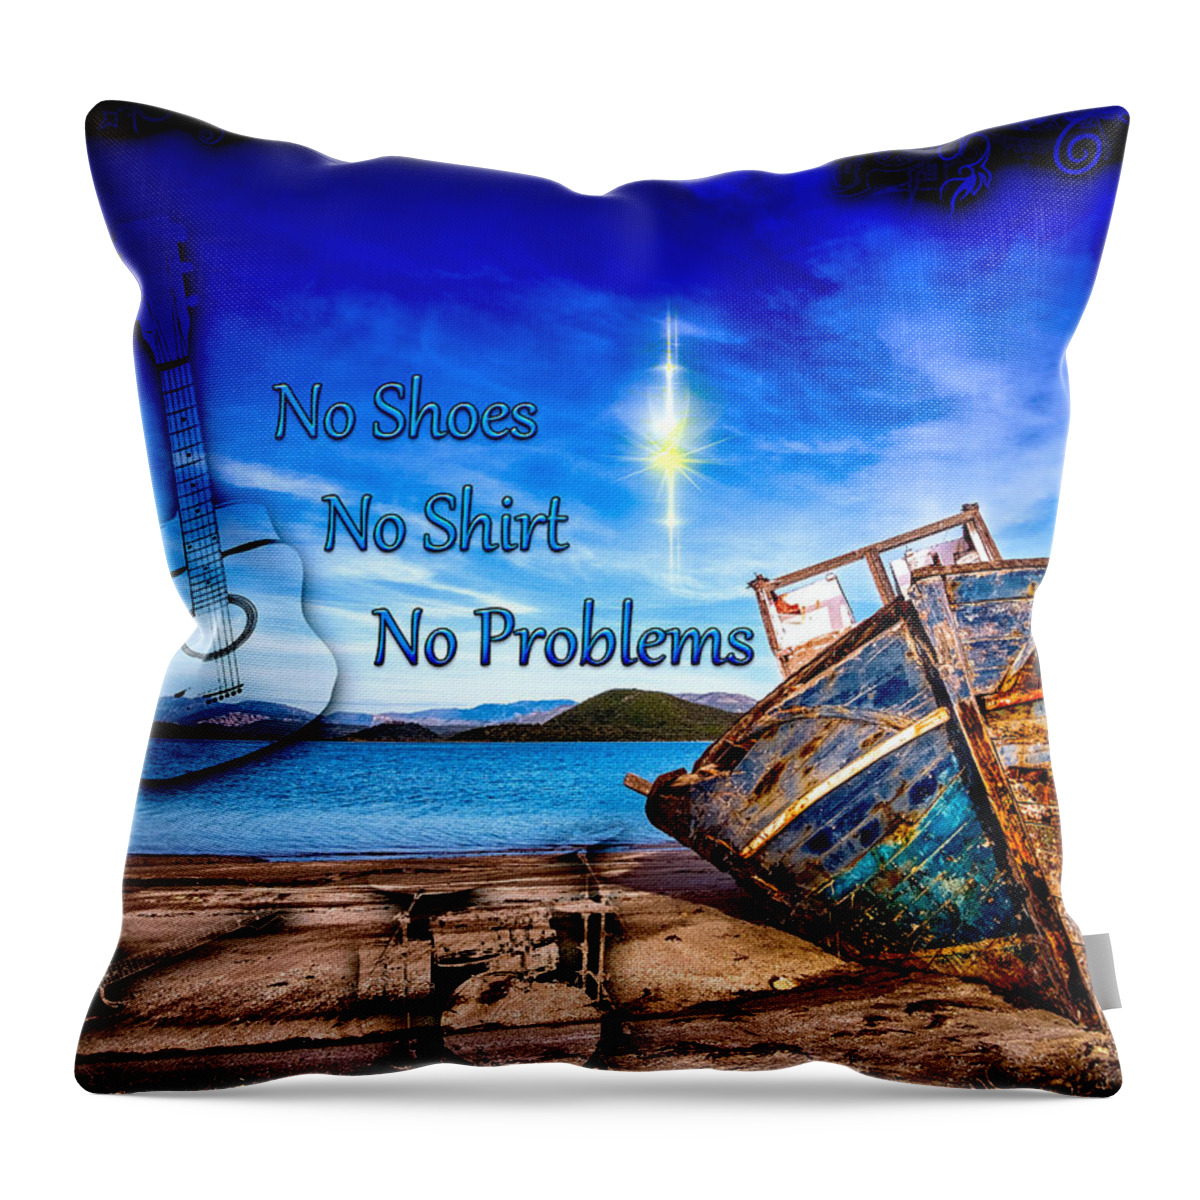 Country Rock Throw Pillow featuring the digital art No Shoes No Shirt No Problems by Michael Damiani